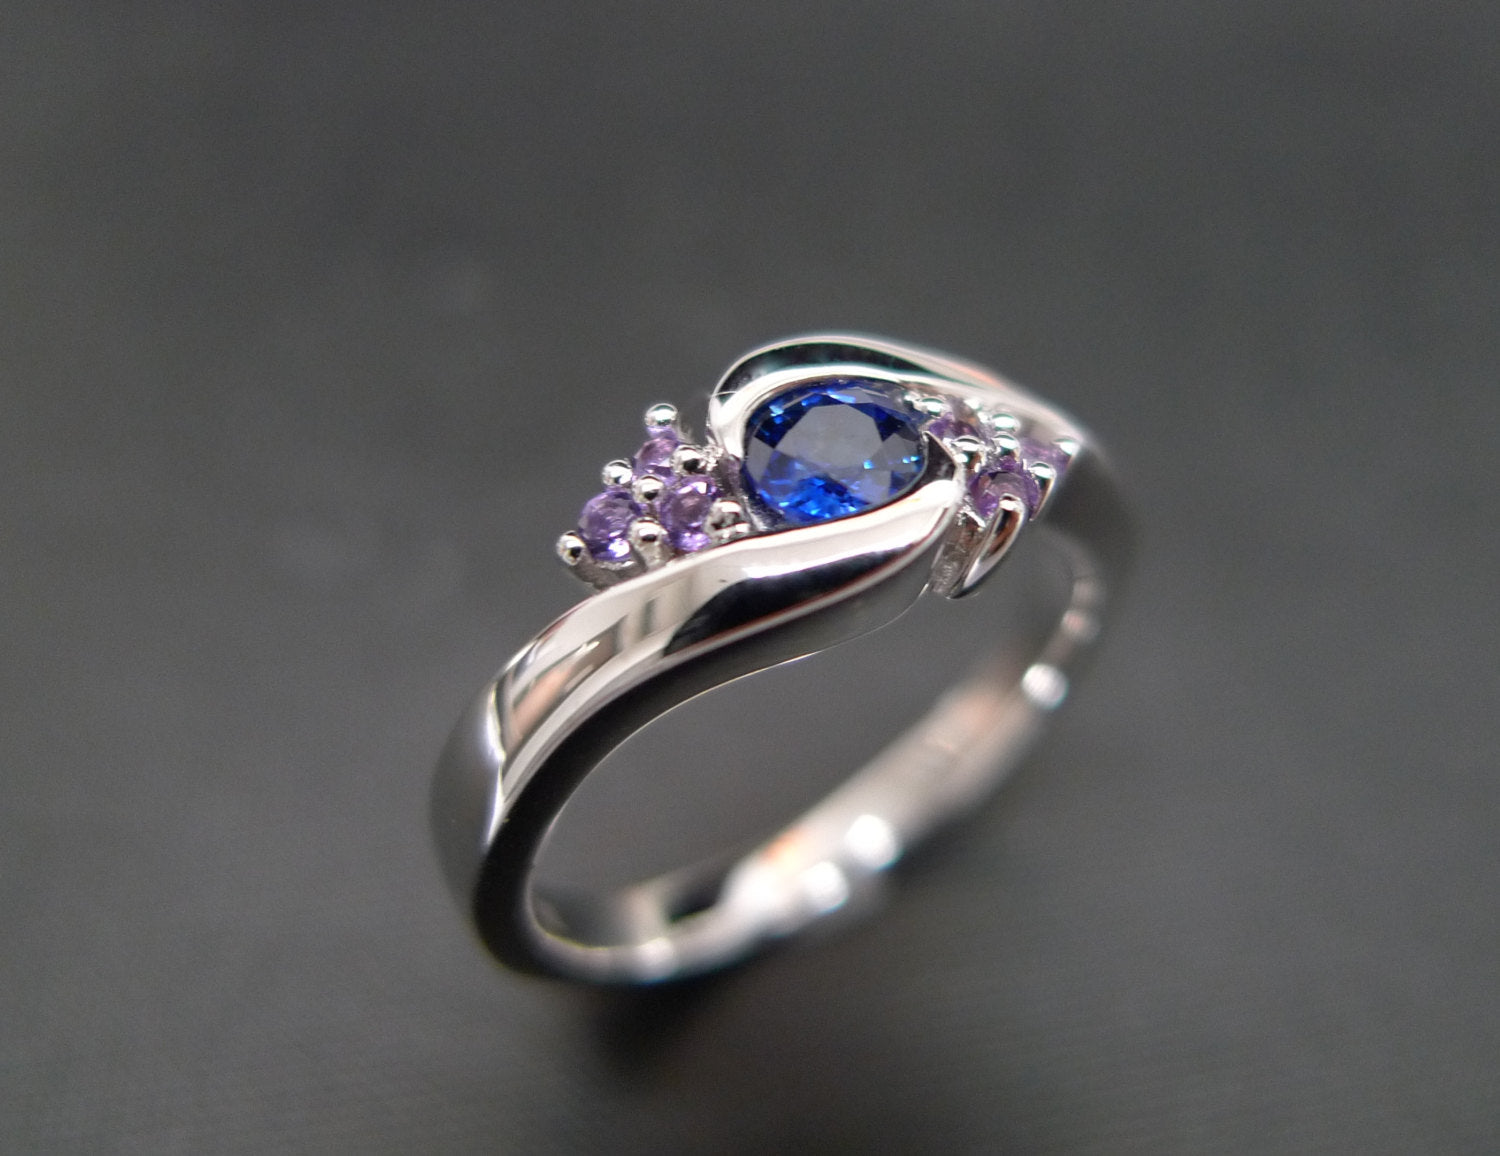 Blue Sapphire and Amethyst Twist Ring in 18K White Gold - HN JEWELRY